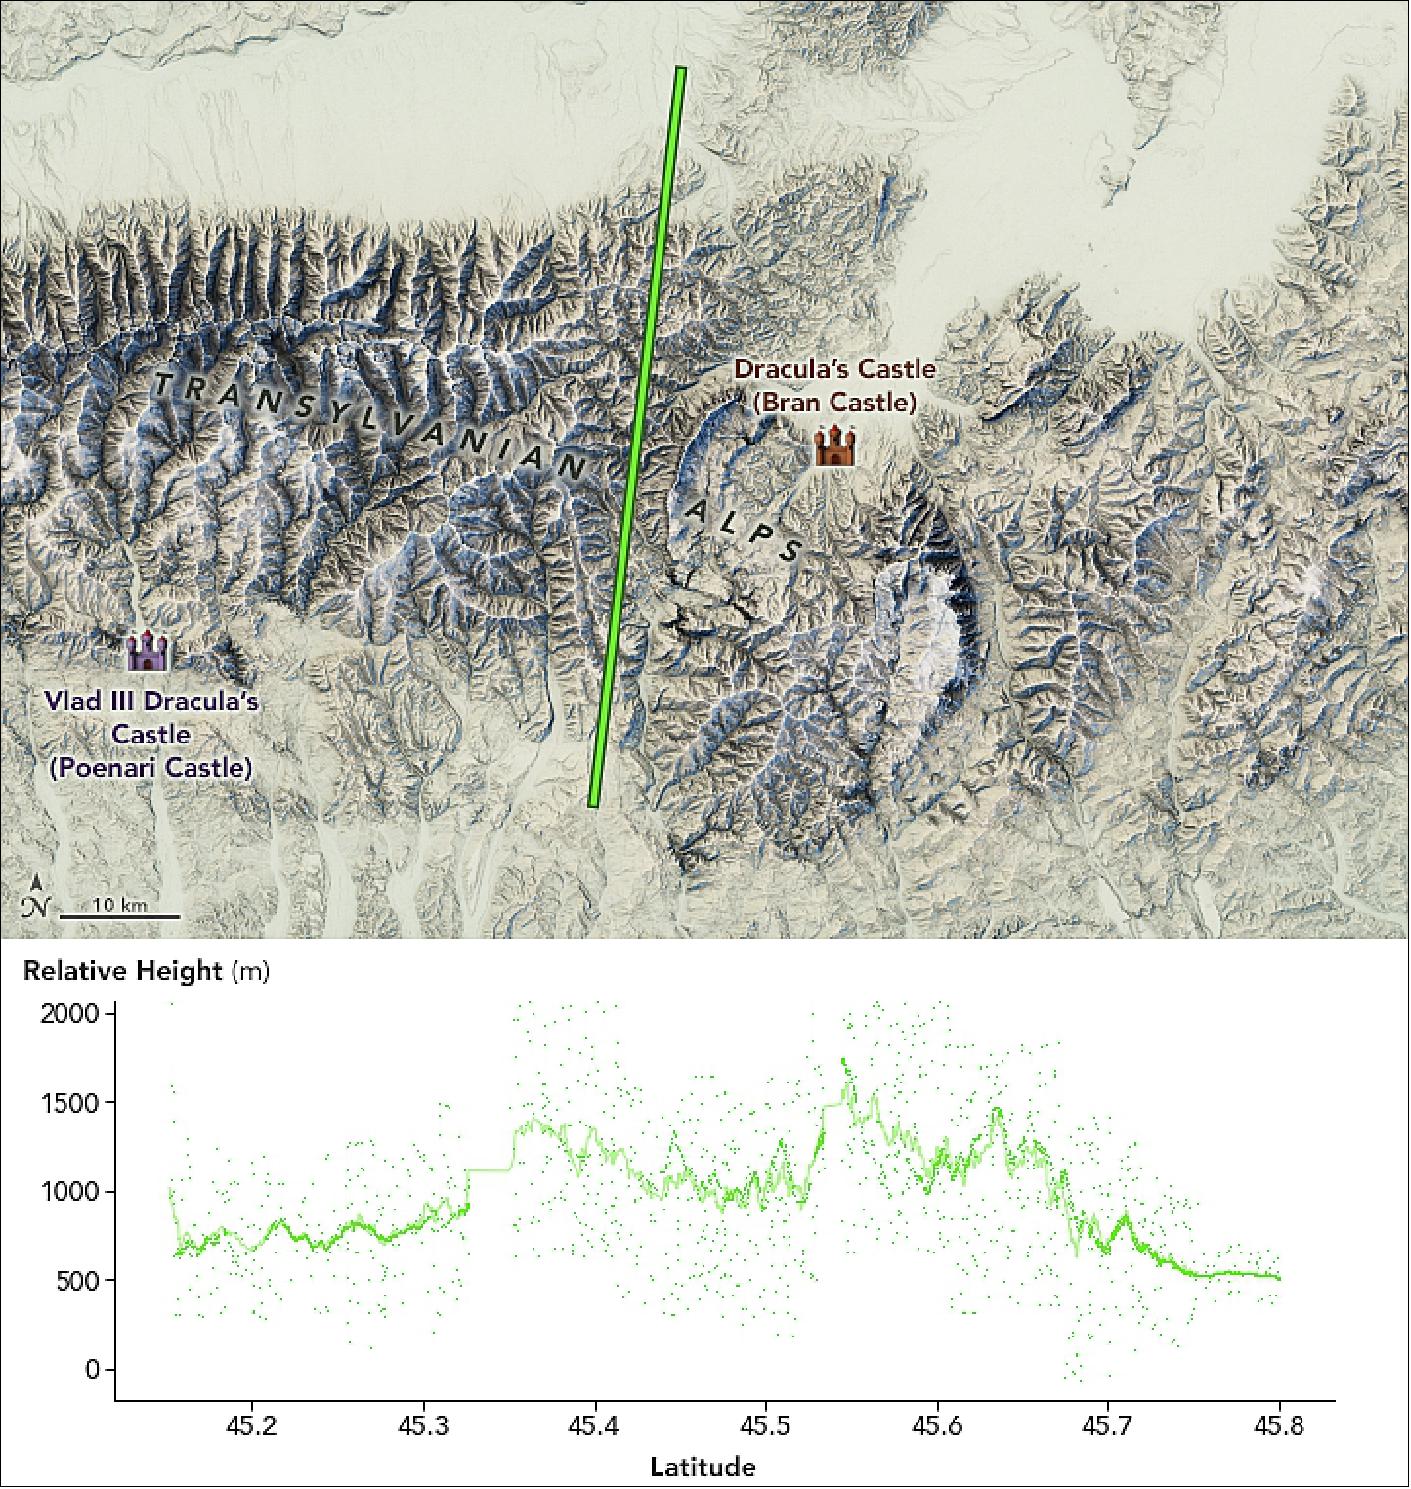 Figure 41: ICESat-2 collected some perspective on the legendary landscape of Vlad and Dracula. “What we are seeing in the figure are the dramatic mountains and valleys in the area,” said ICESat-2 project scientist Tom Neumann of NASA’s Goddard Space Flight Center. The satellite captured elevation measurements with its ATLAS (Advanced Topographic Laser Altimeter System) on October 31, 2018. The measurements are overlaid on topography data from NASA’s SRTM (Shuttle Radar Topography Mission) to emphasize the terrain (image credit: NASA Earth Observatory, image by Joshua Stevens, using ICESat-2 data from the National Snow & Ice Center, topographic data from SRTM, and Landsat data from the U.S. Geological Survey. Story by Mike Carlowicz)